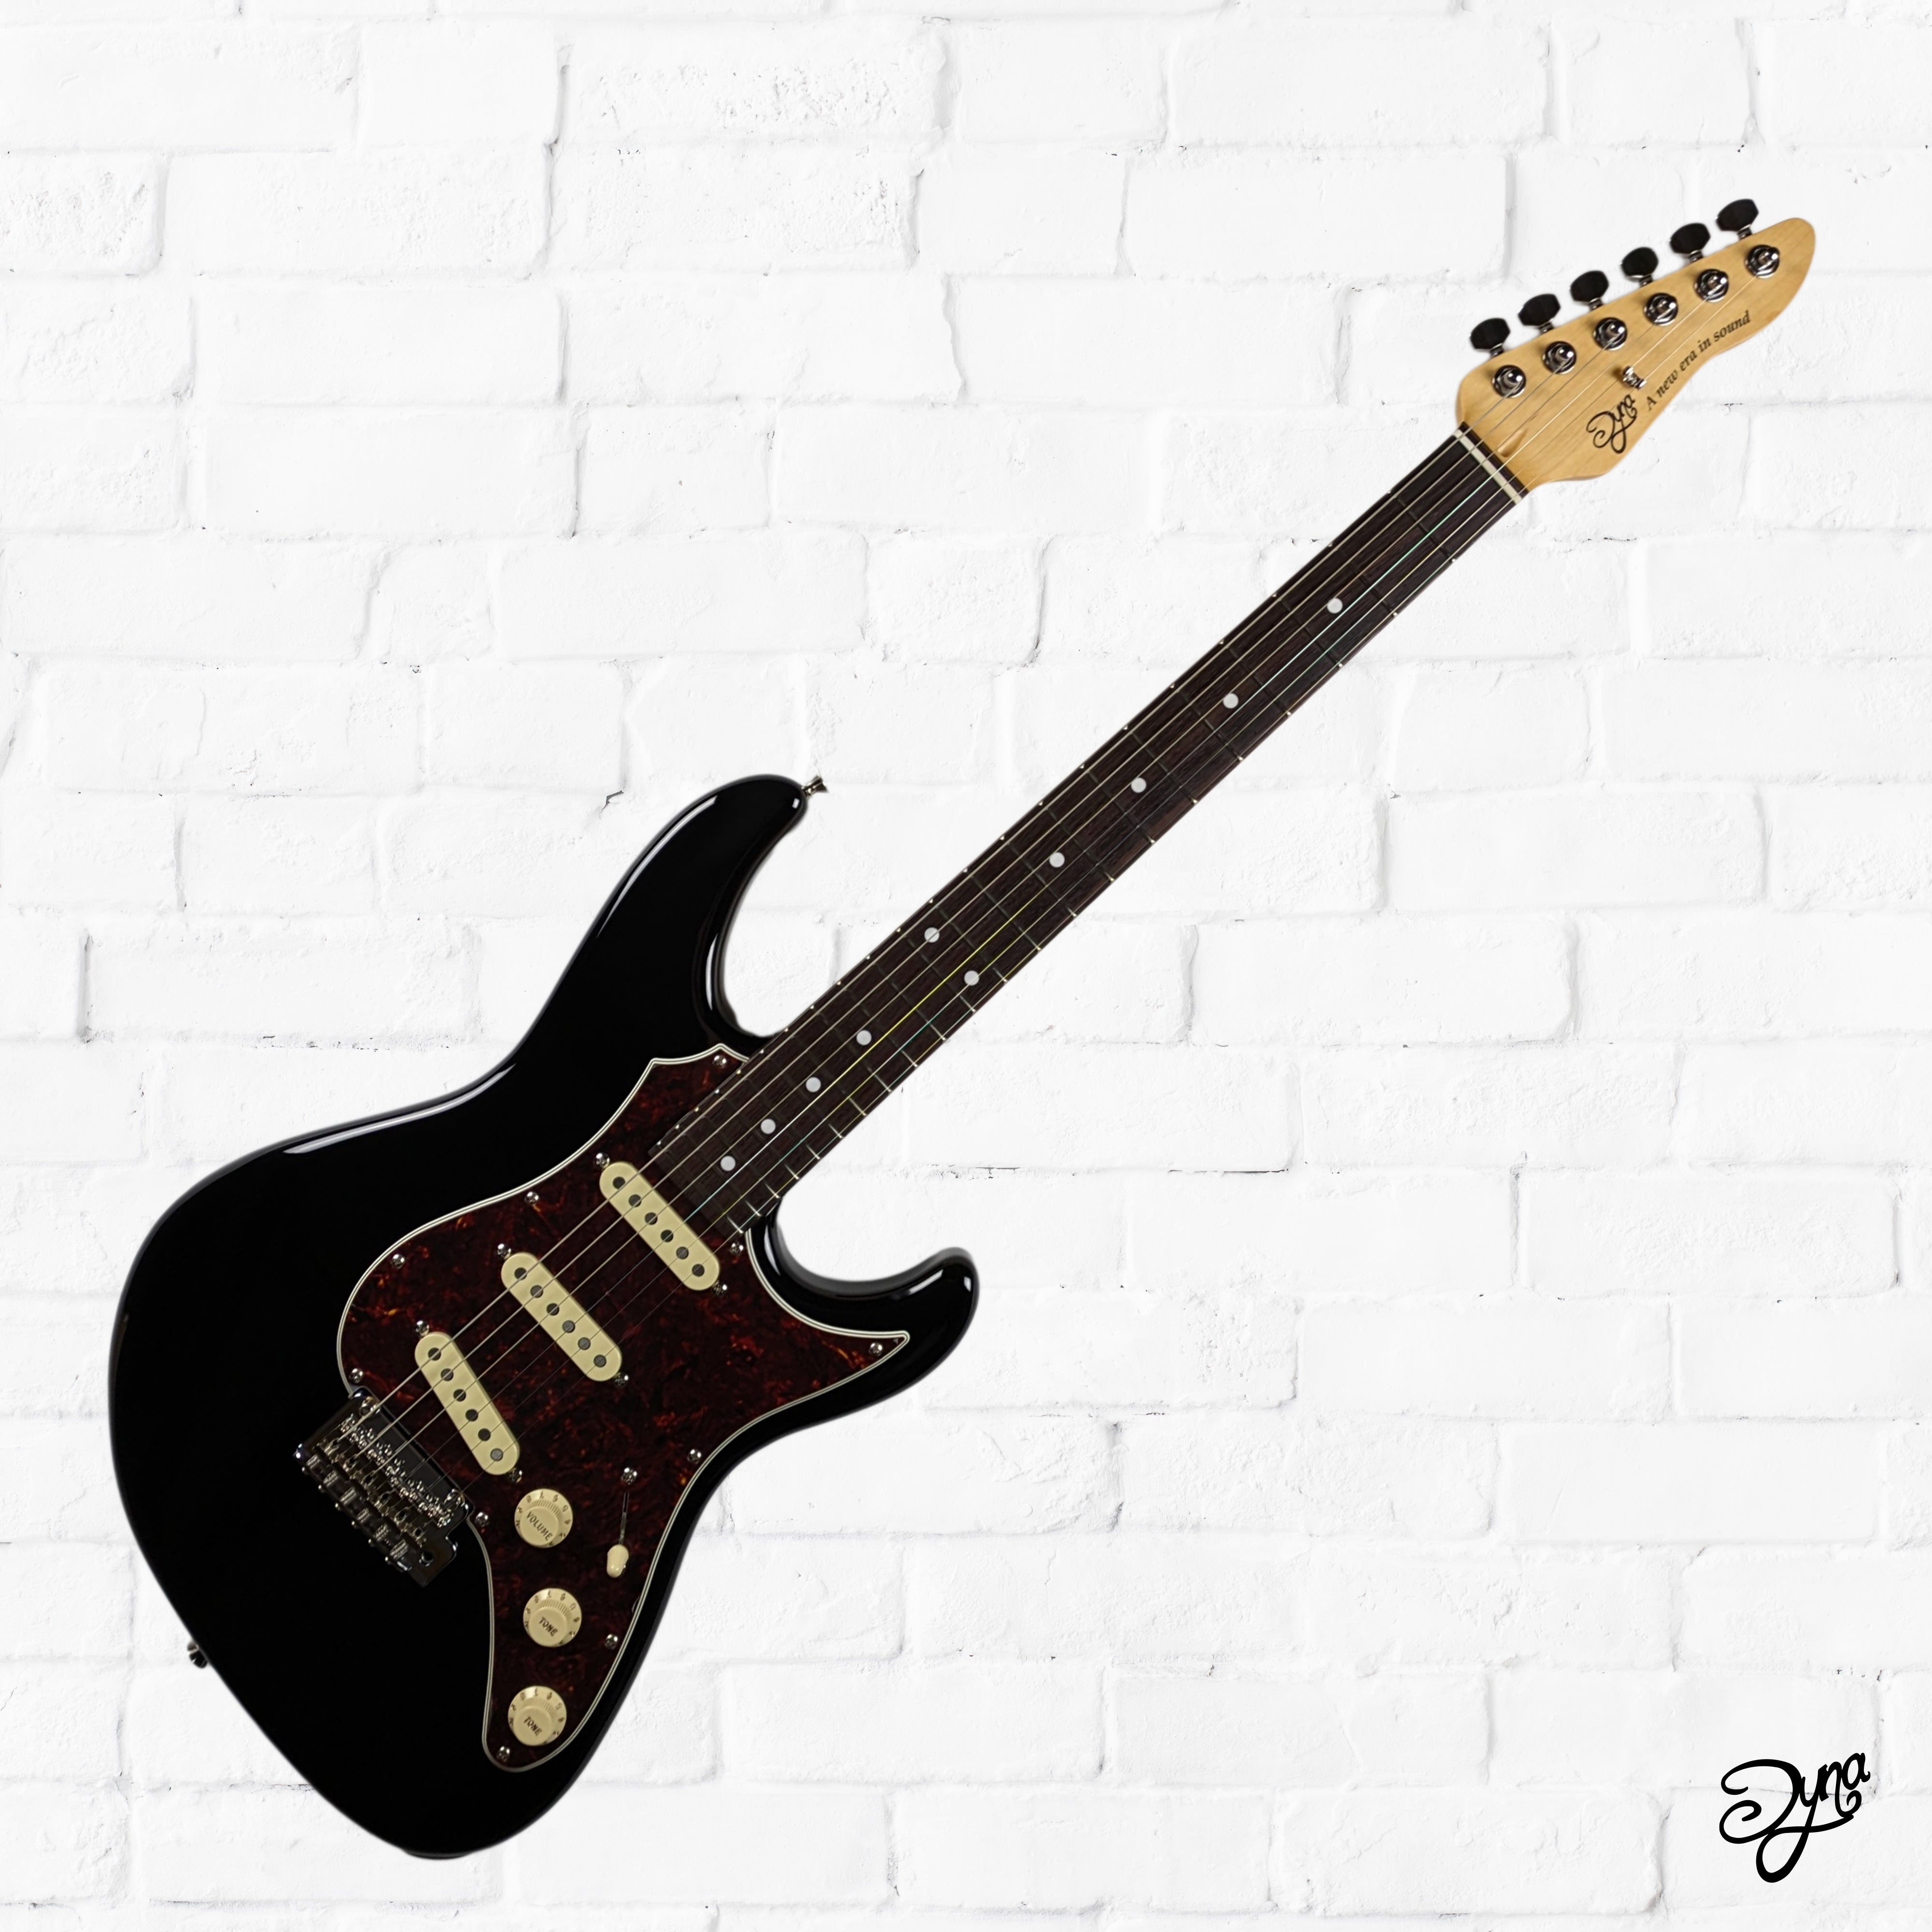 Guitars – Dyna musical instruments